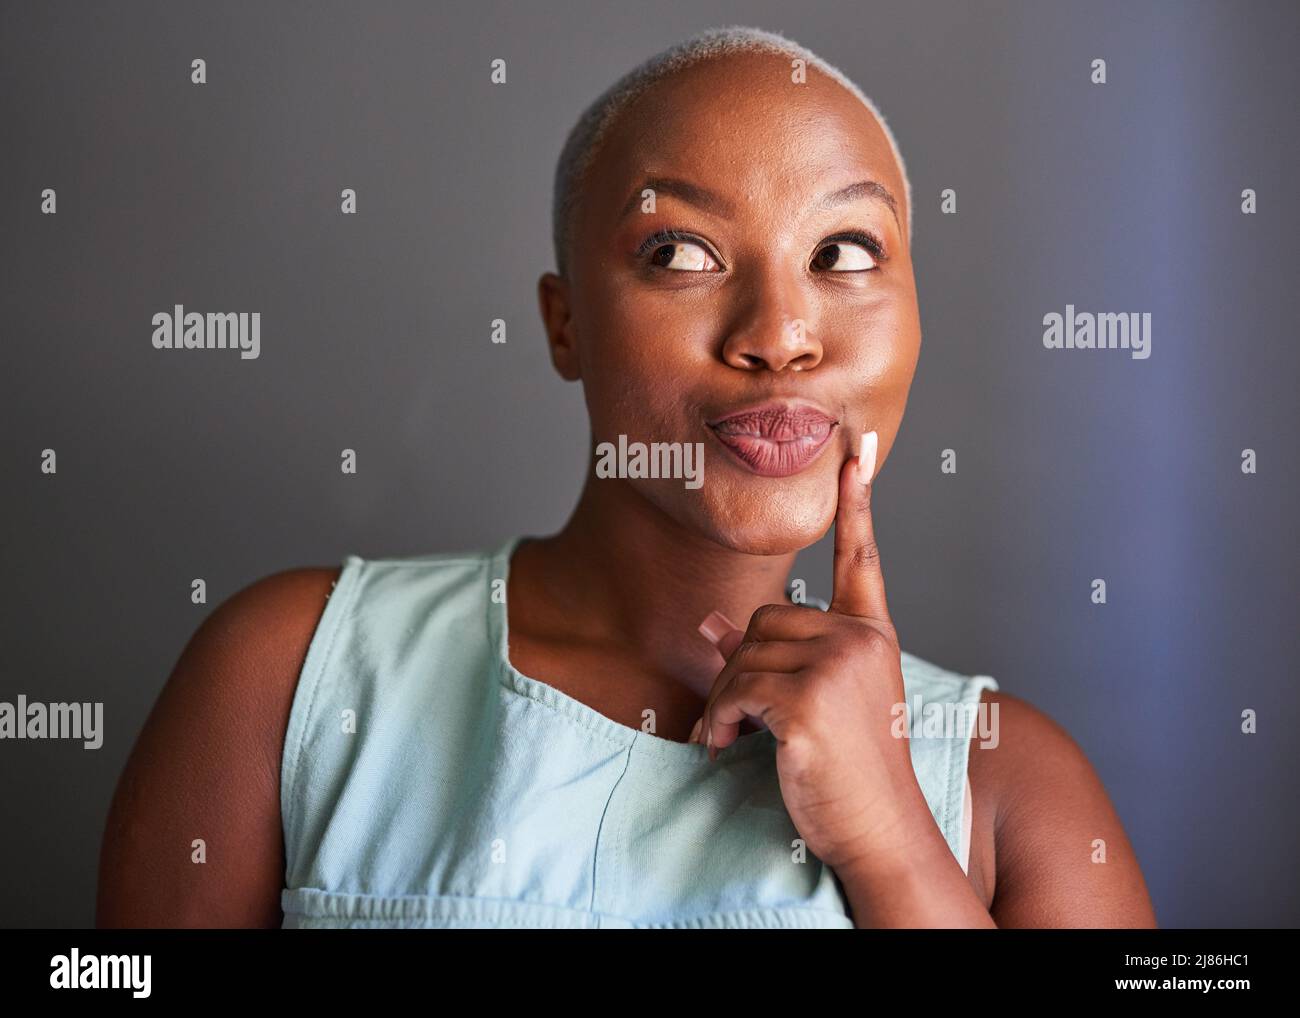 A young Black model poses silly face for the camera Stock Photo